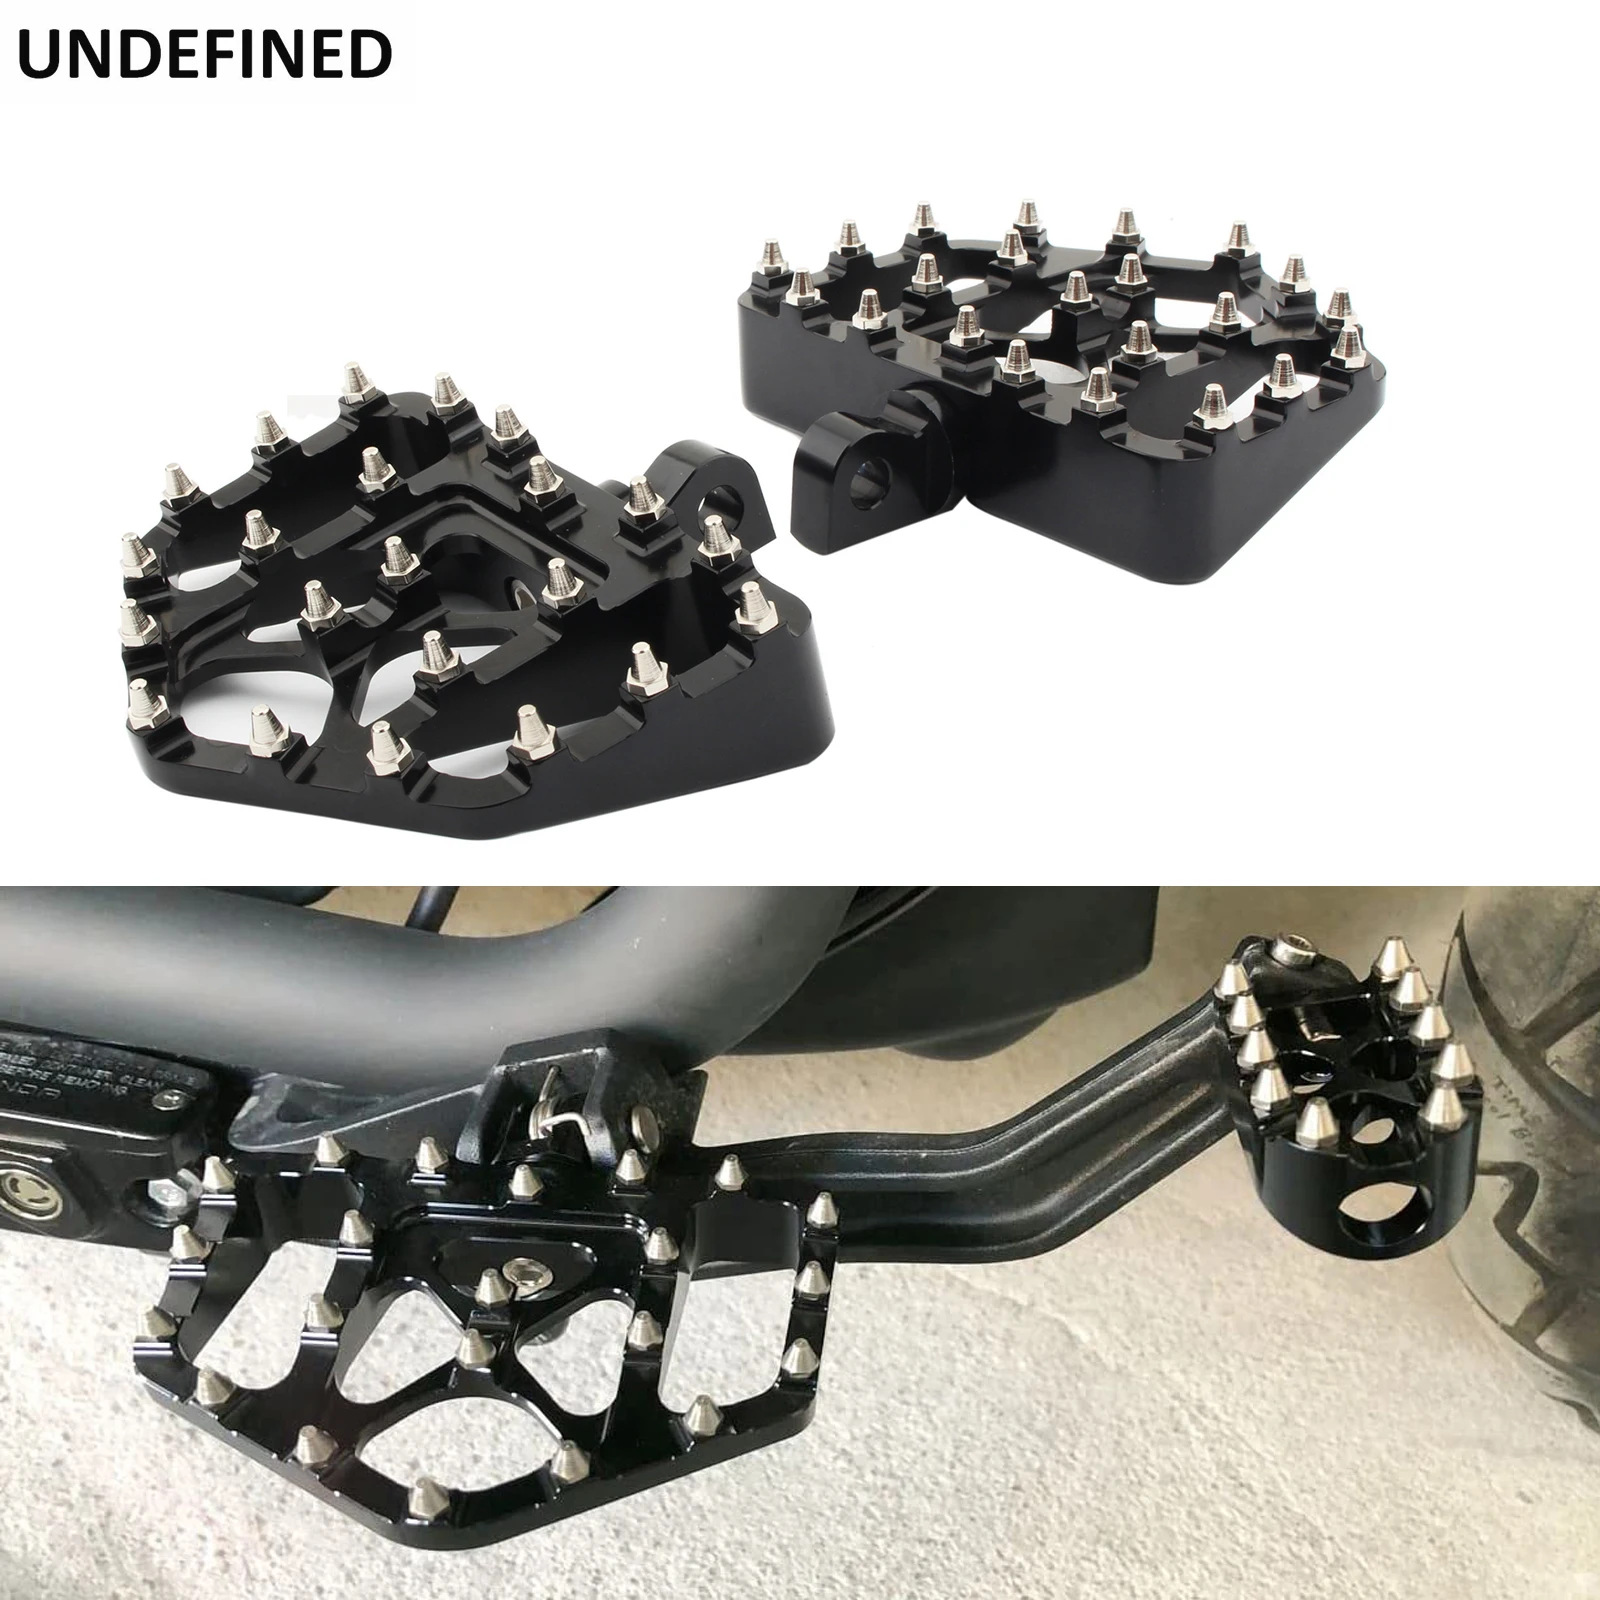 

MX Foot Pegs Pedals Wide Footrests Floorboards For Harley Sportster XL883 Dyna FXDF Softail Touring Road Street Glide Road King